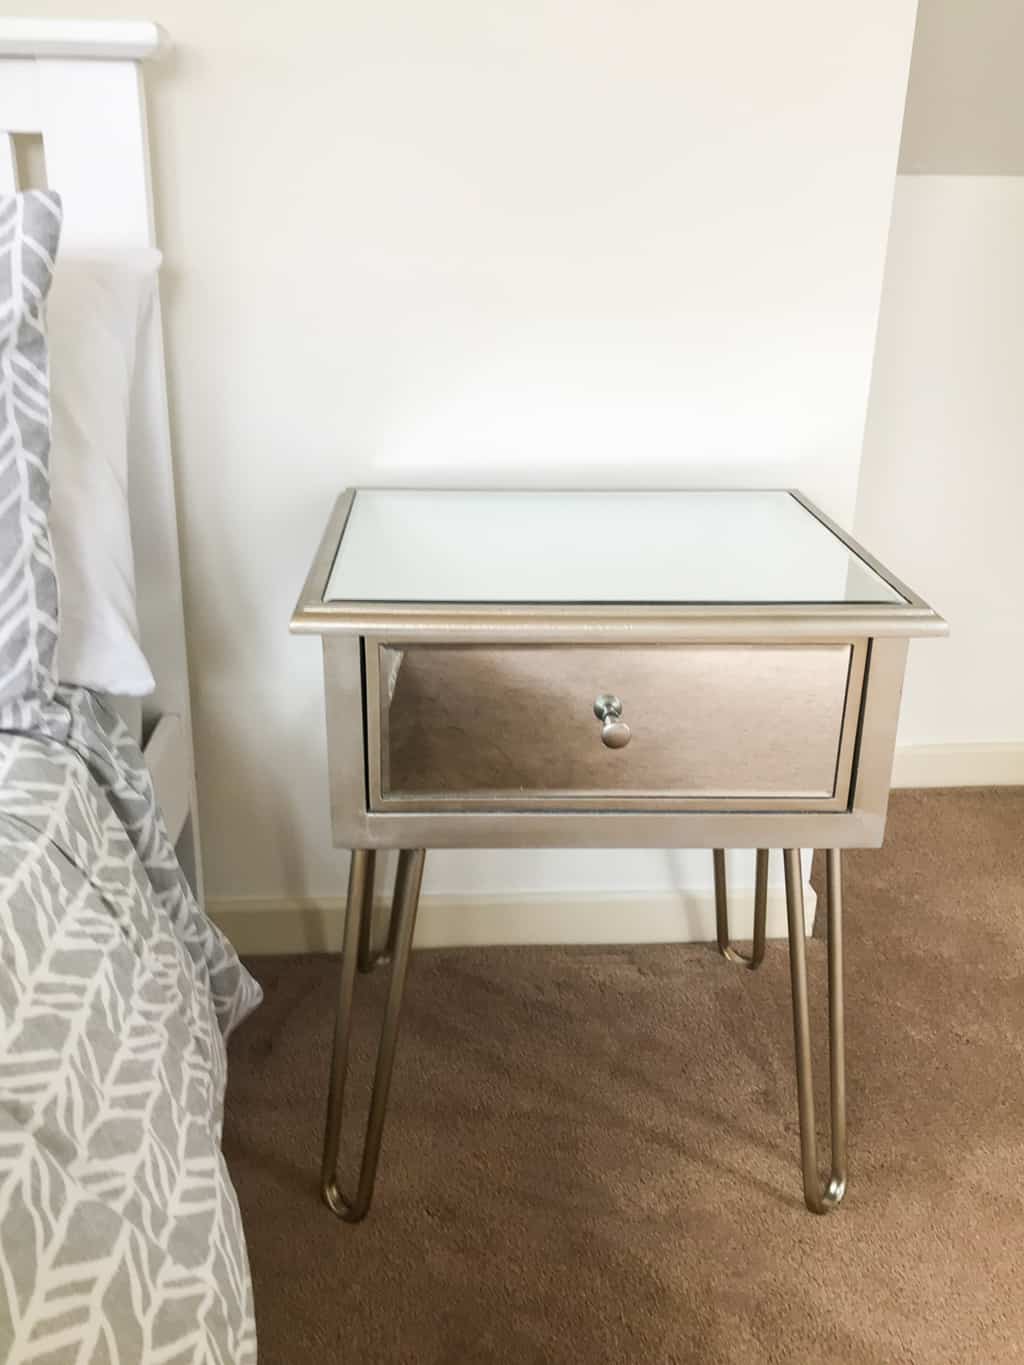 Mirrored Bedside Table, silver frame, hairpin legs, metal handle